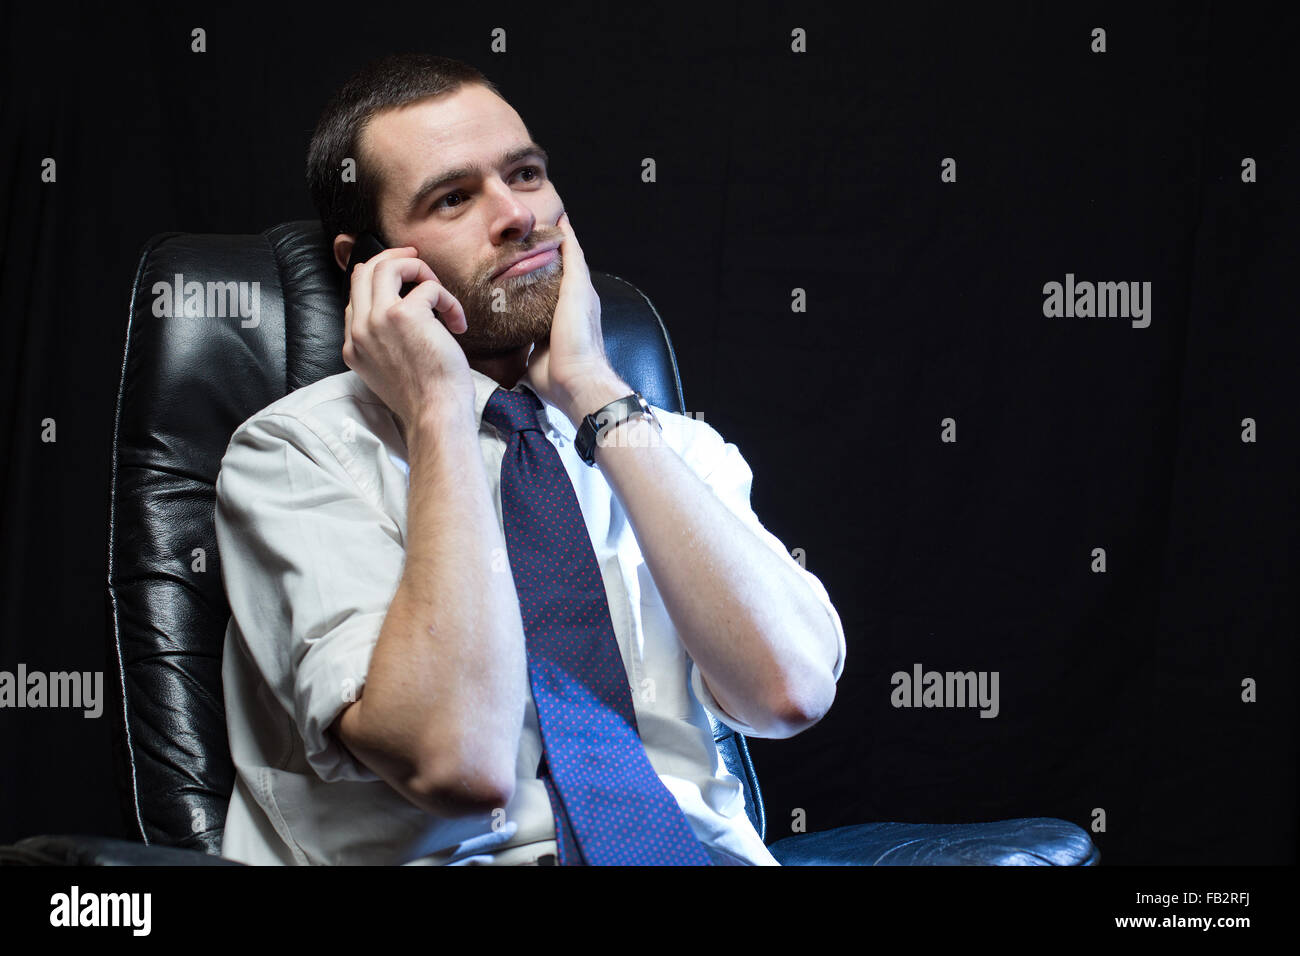 An office worker, wearing a shirt and tie, speaks on the phone. Stock Photo